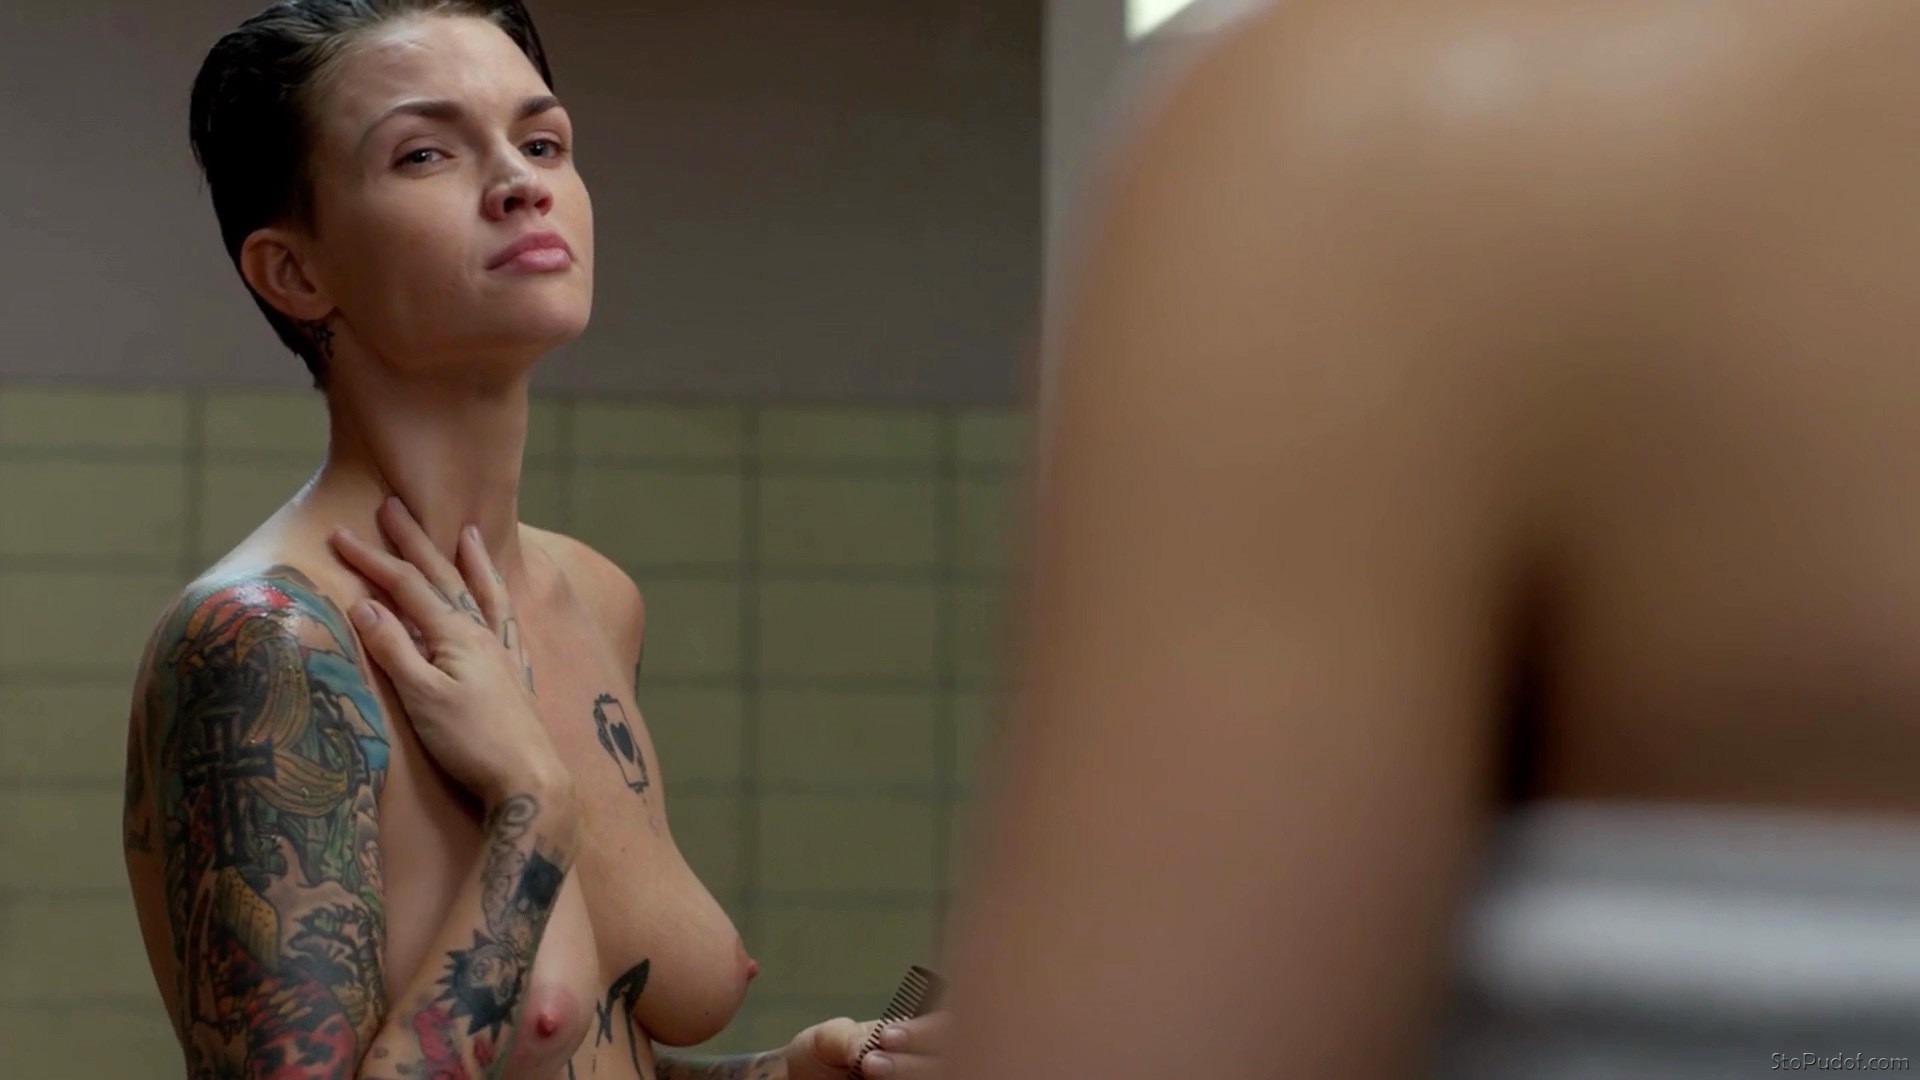 Ruby Rose naked pictures - UkPhotoSafari